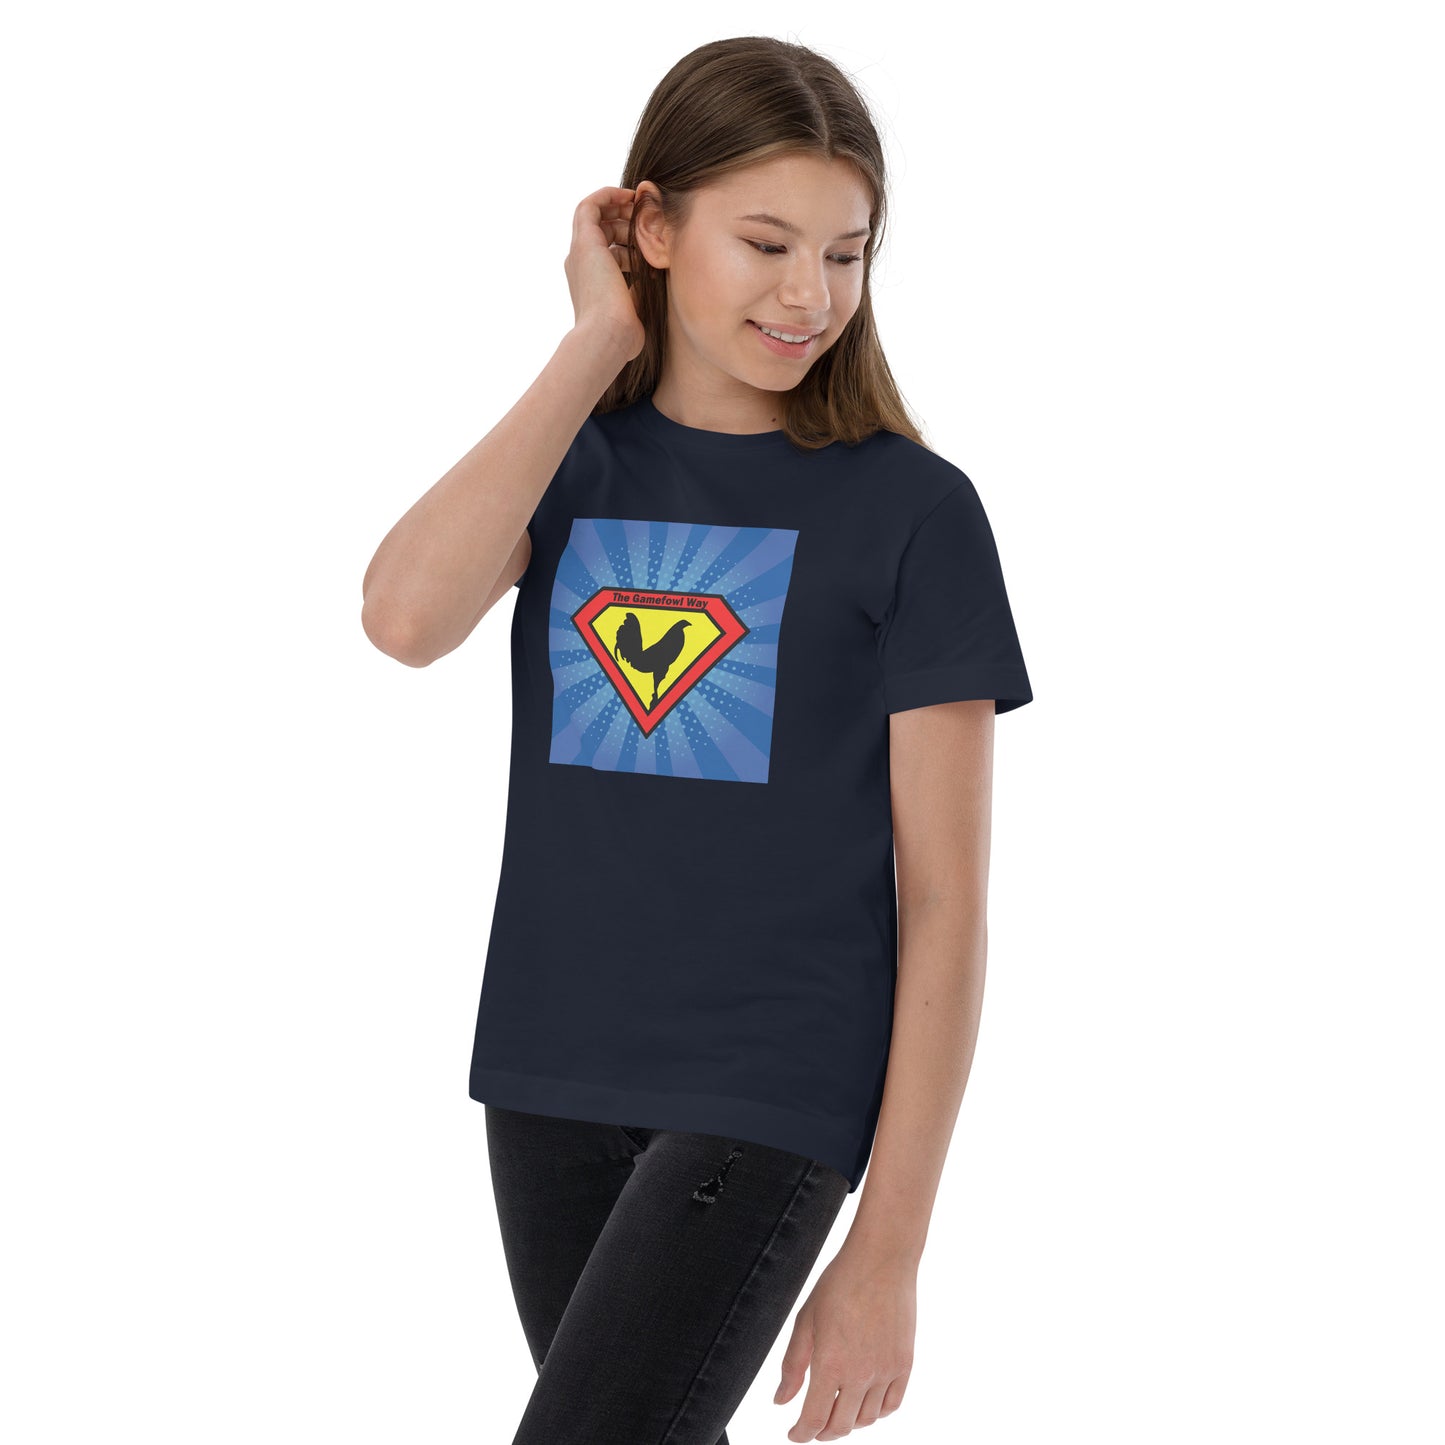 Youth COMIC HE'S DEAD Gamefowl Rooster Tee